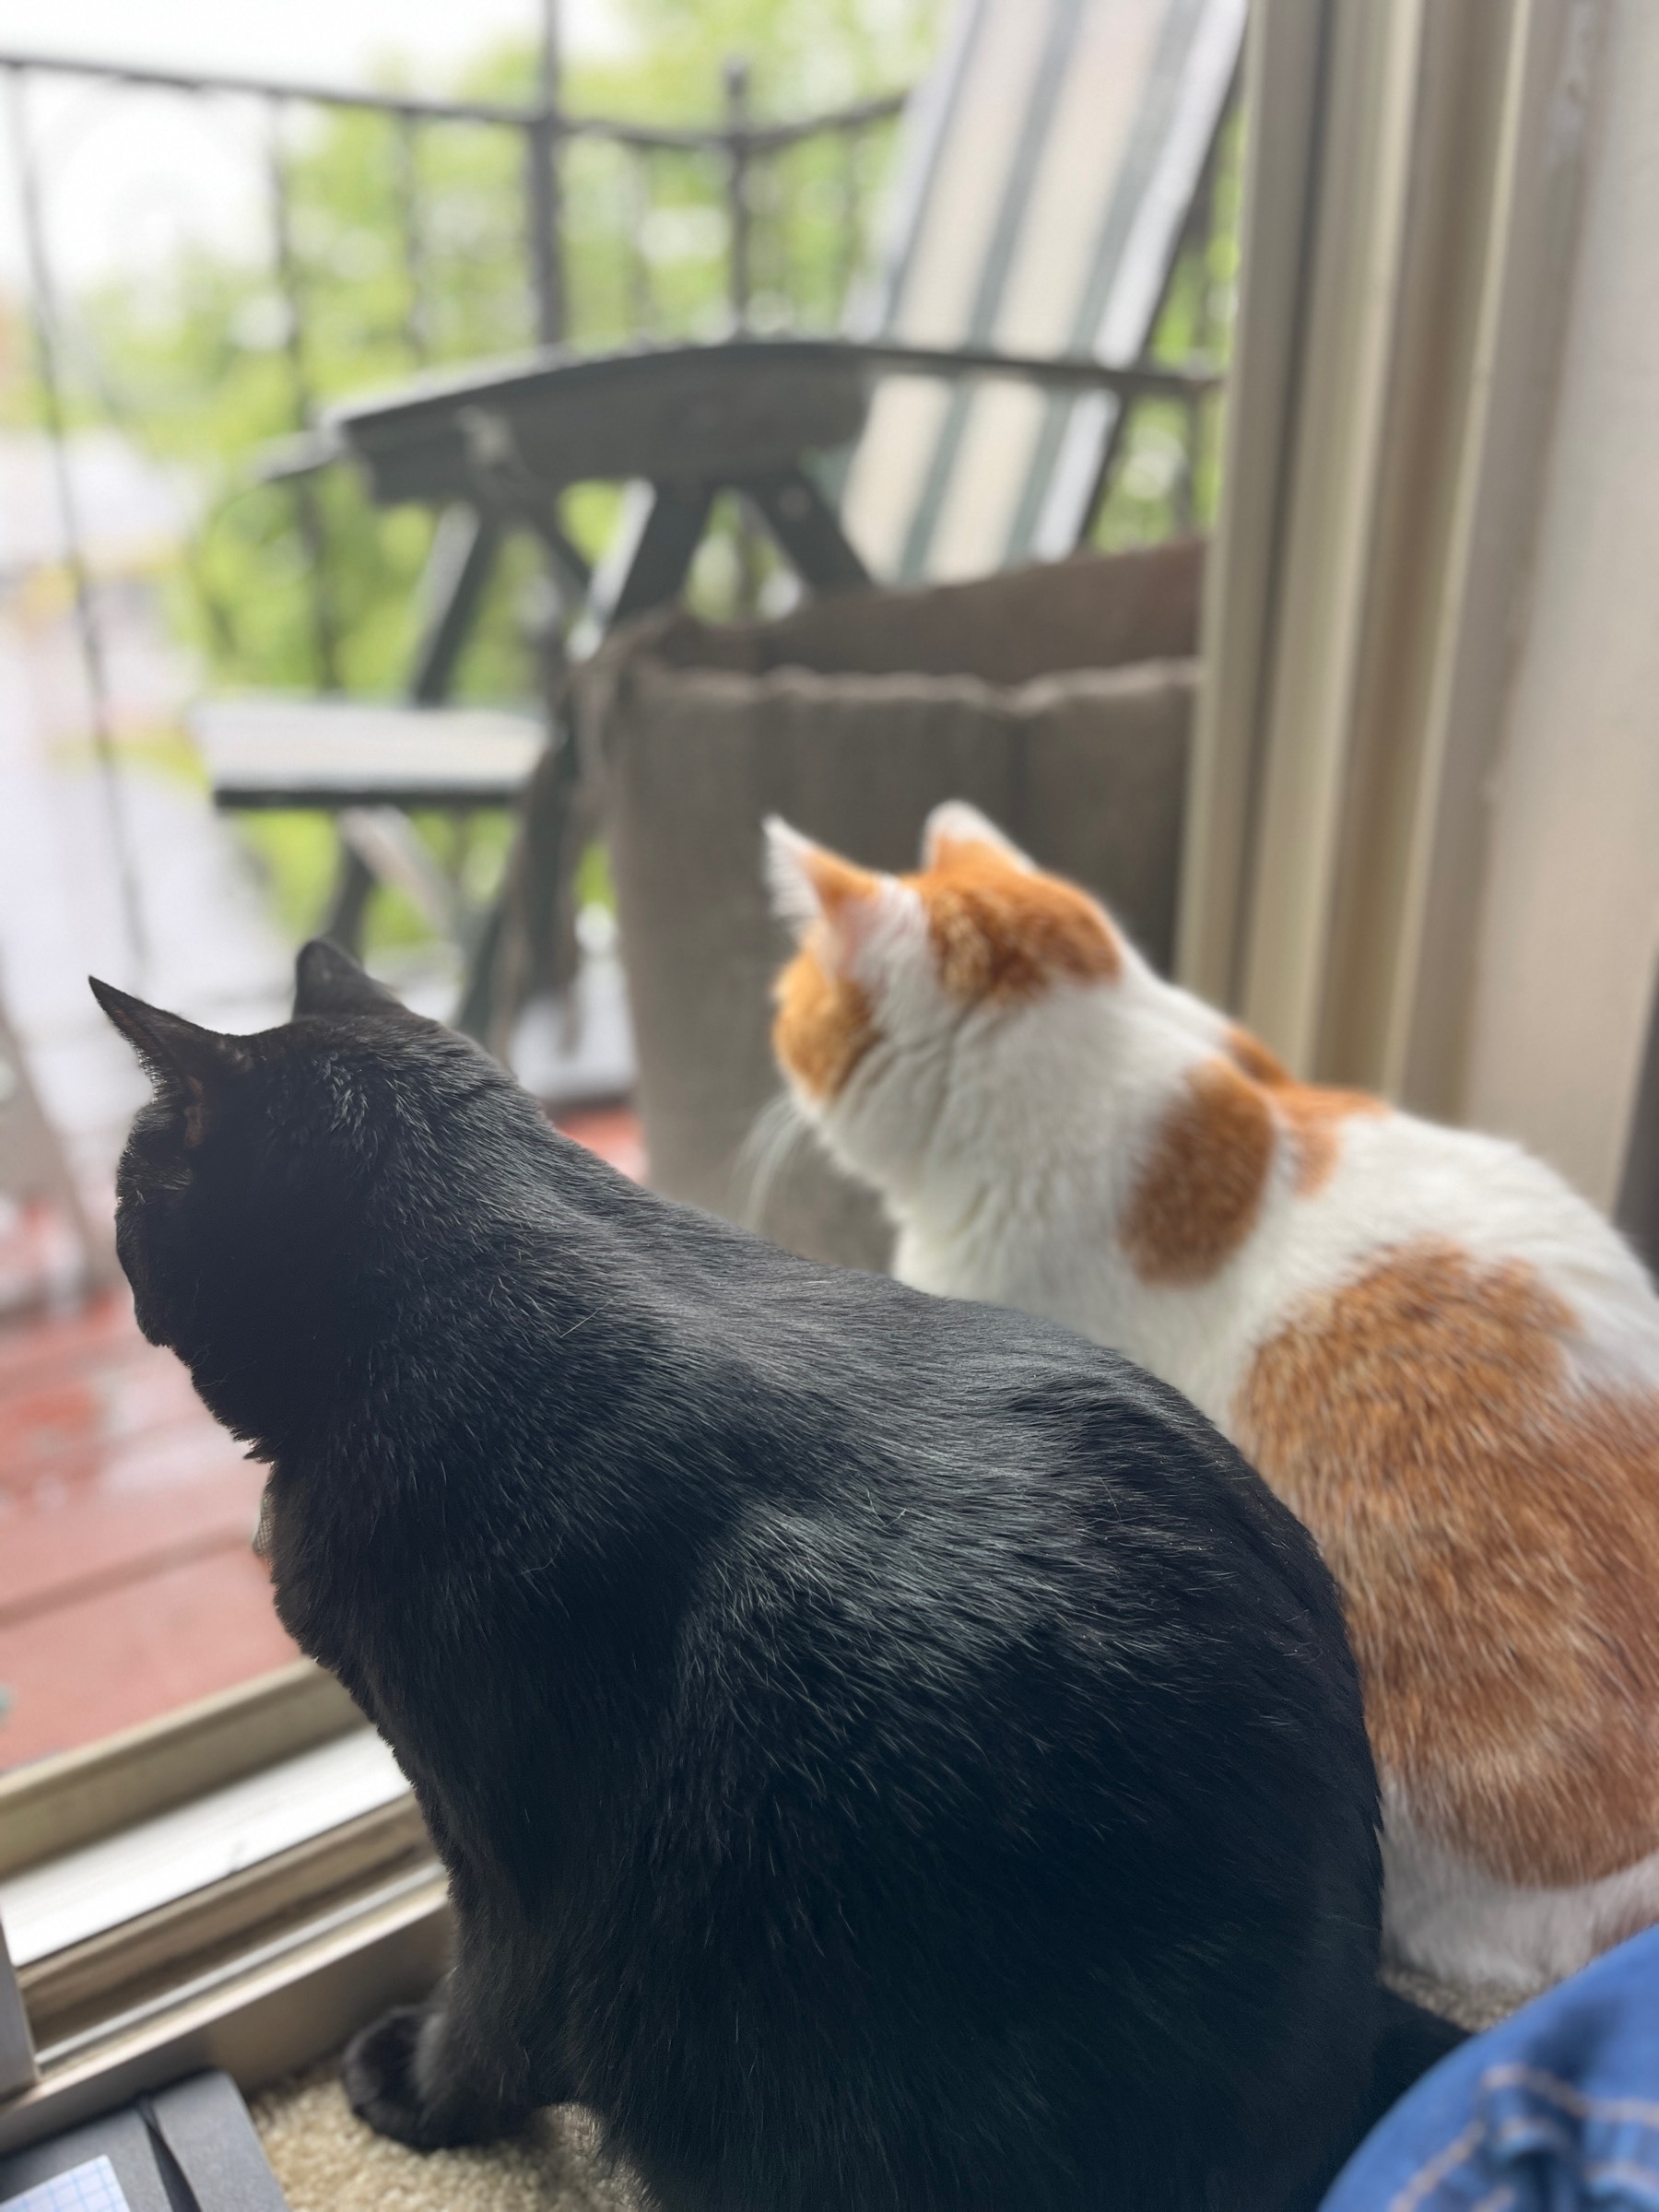 Two cats side by side staring out of a glass balcony door